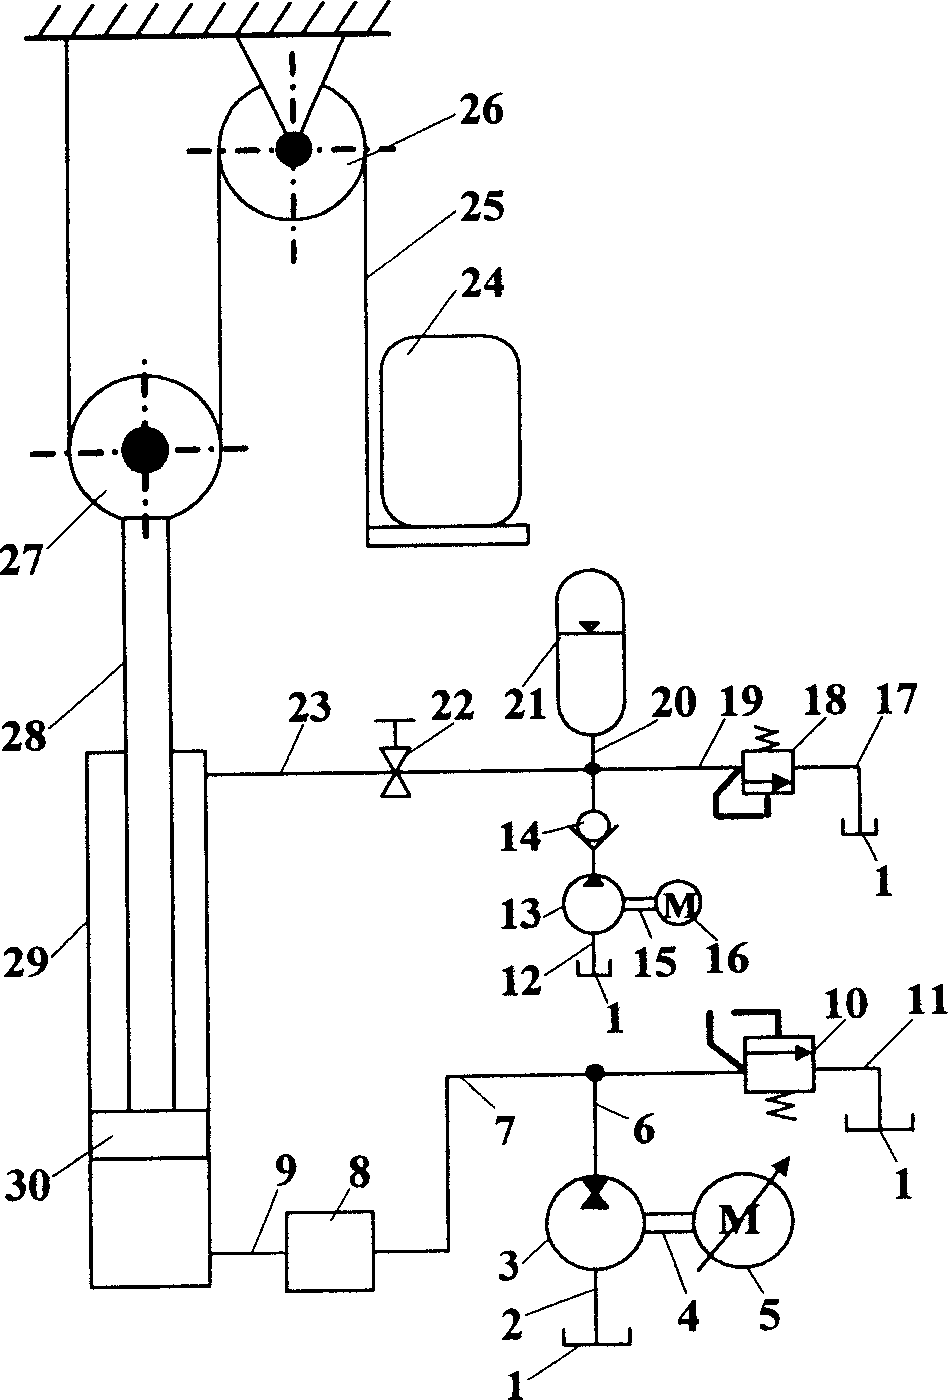 Push and pull cylinder variable frequency energy-saving hydraulic elevator system of balancing load by accumulator loop